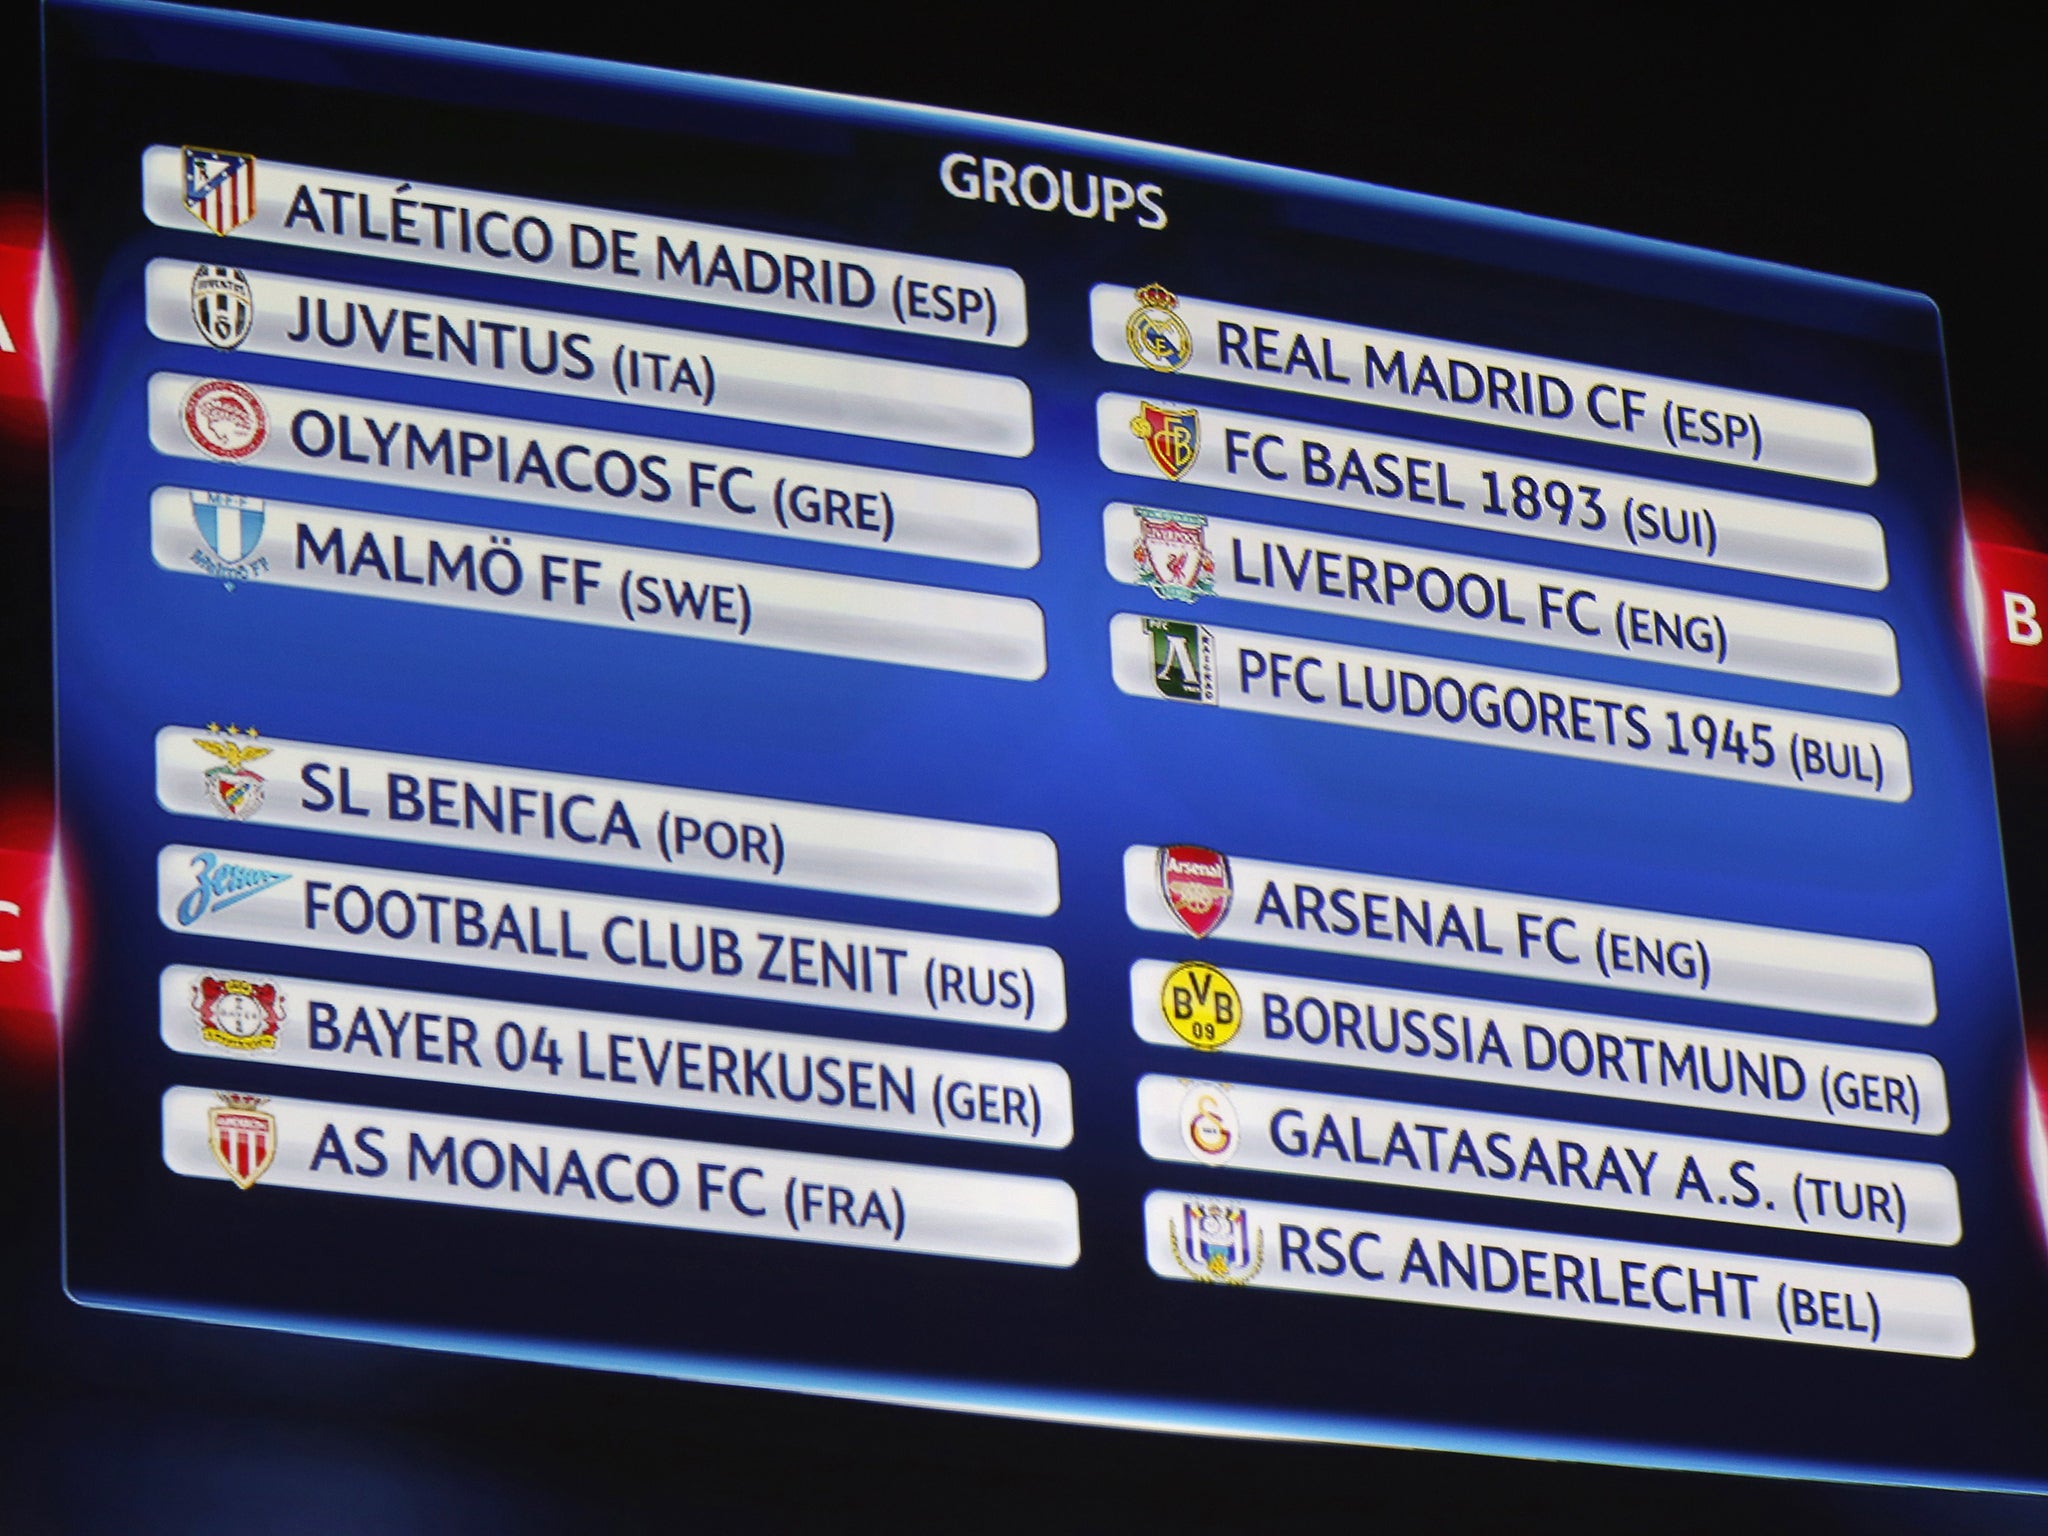 Liverpool were grouped together with Real Madrid in the draw